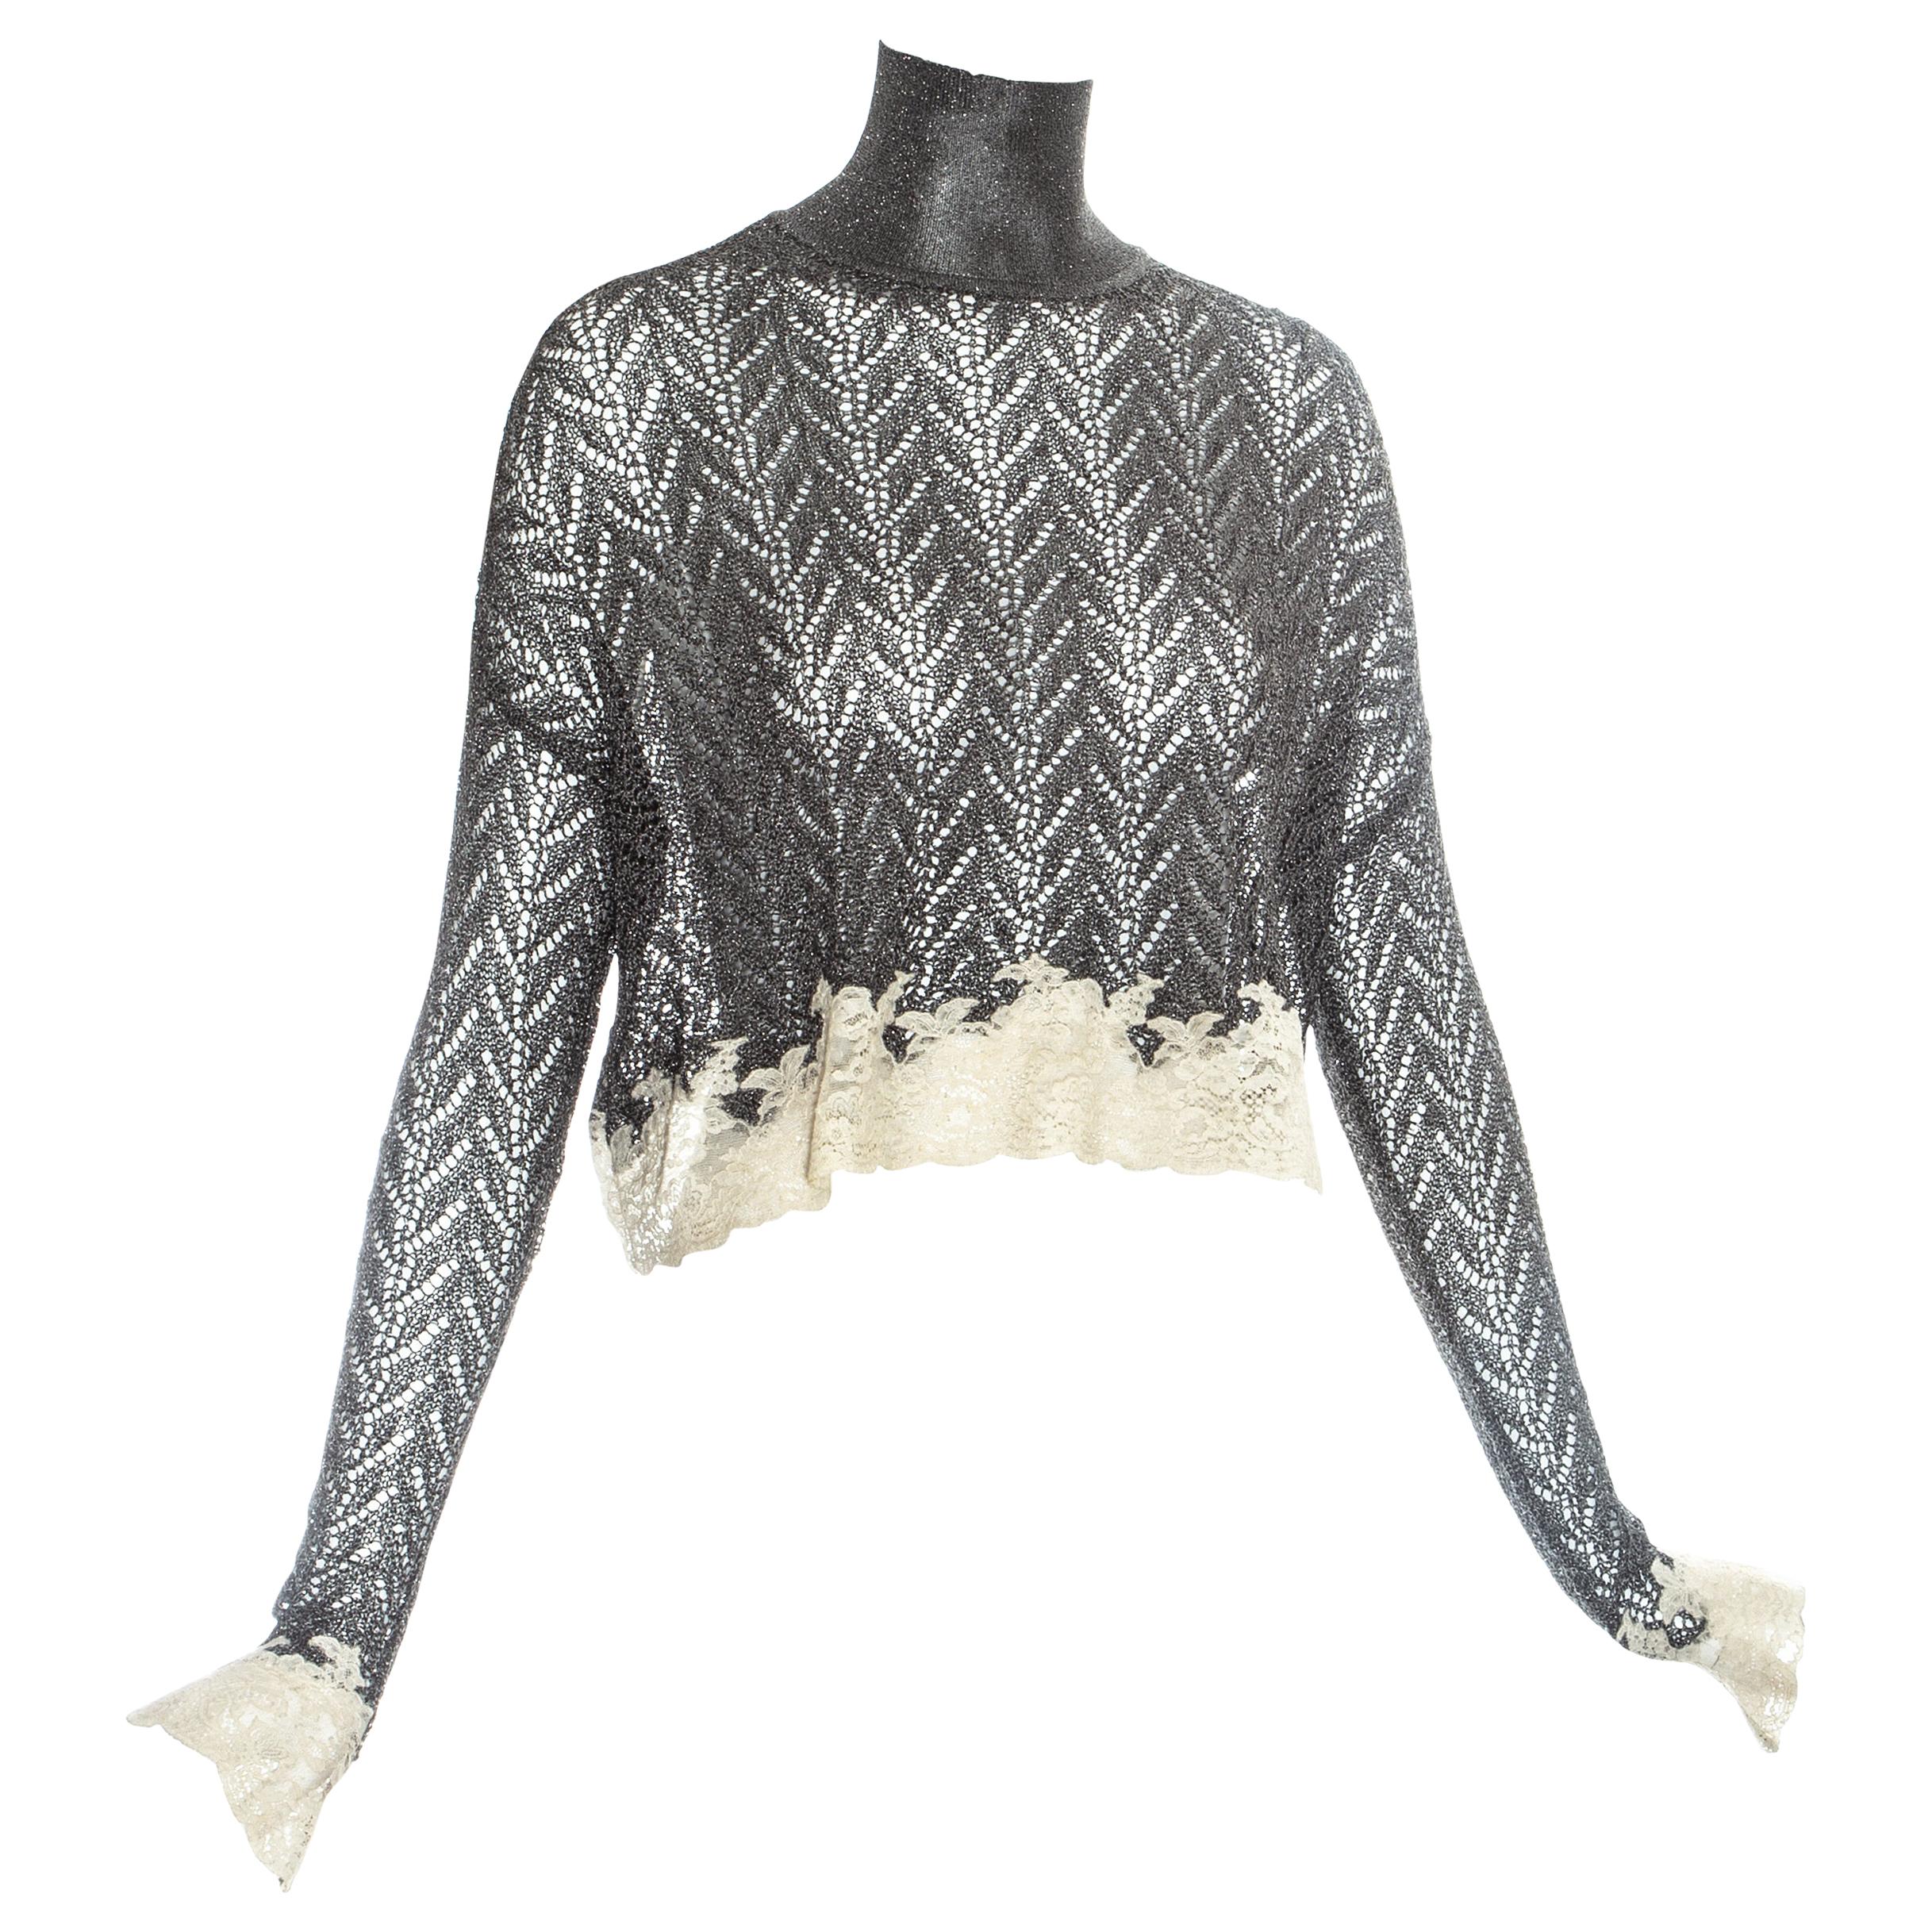 Christian Dior silver crochet knit sweater with cream lace, fw 1998